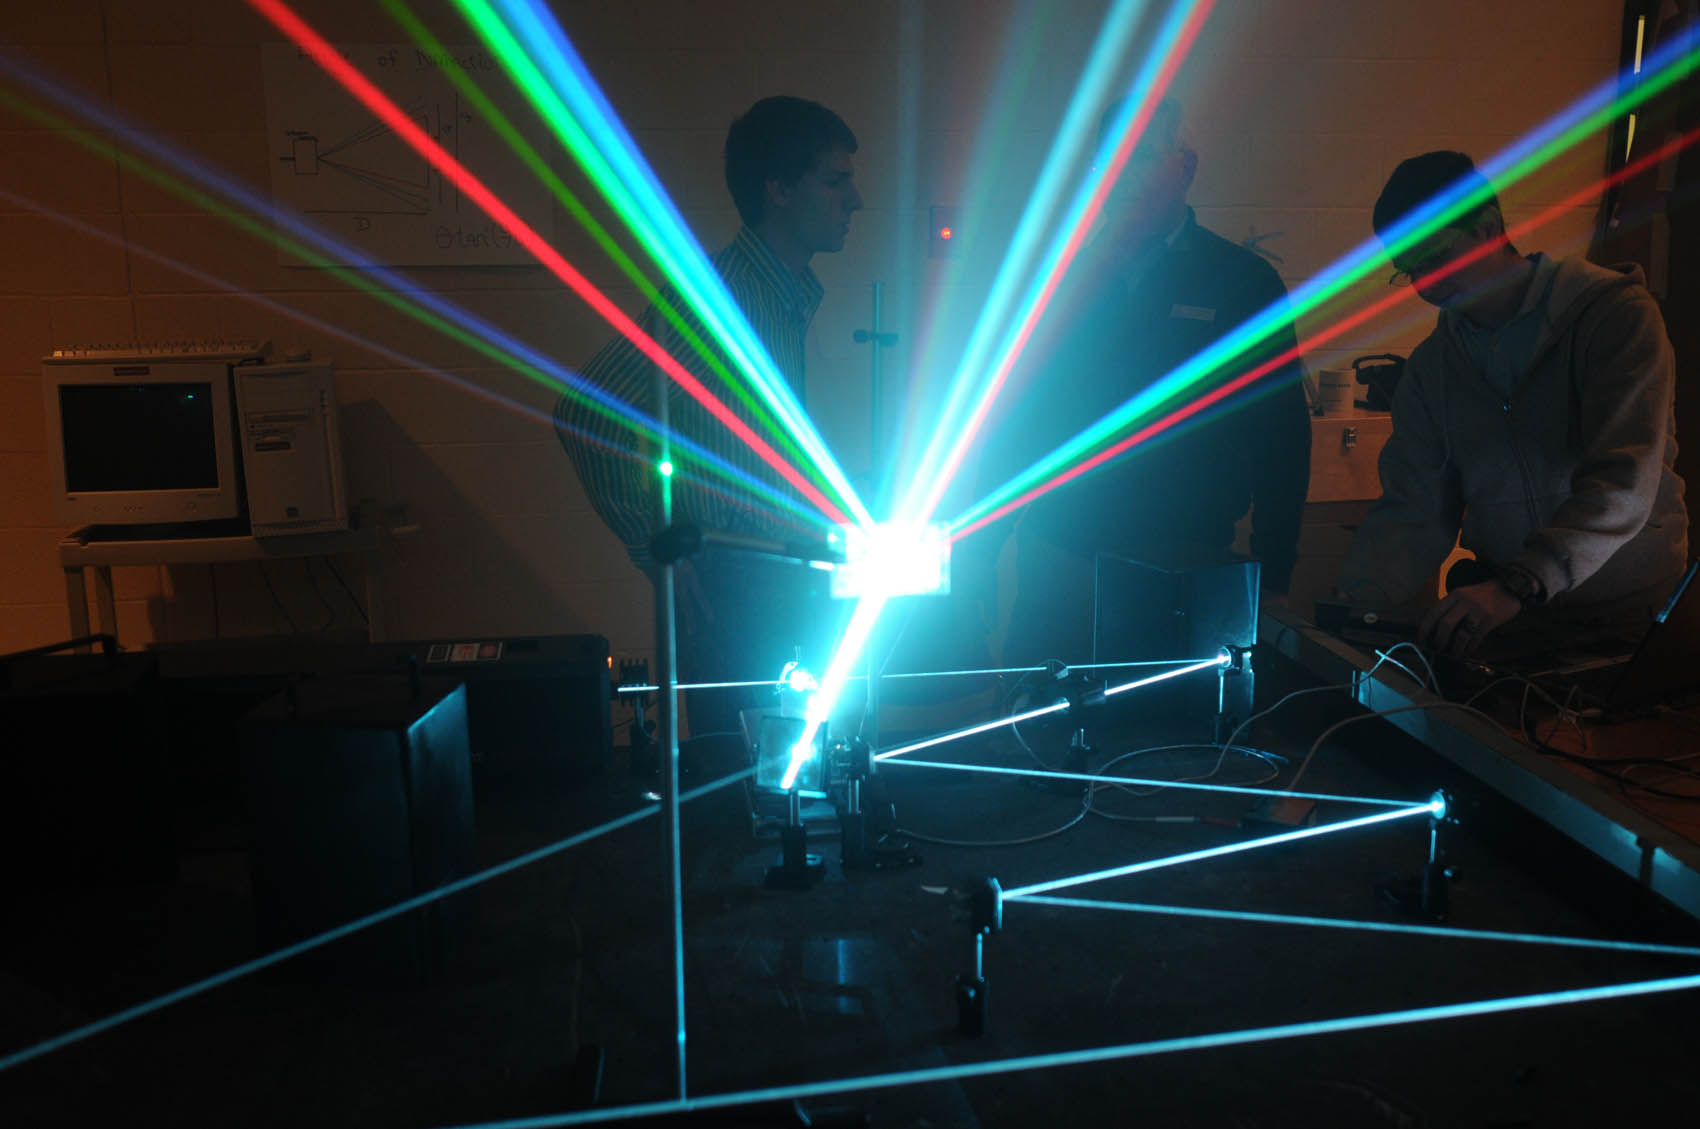 Click to enlarge,  Central Carolina Community College's International Year of Light 2015 celebration, showcasing the college's Laser and Photonics Technology program, will be held at 6:30 p.m. on Tuesday, Nov. 17, at the Harnett County Campus in Lillington. The event is open to the general public. As part of the celebration, an essay contest is being held for middle school and high school aged students. 